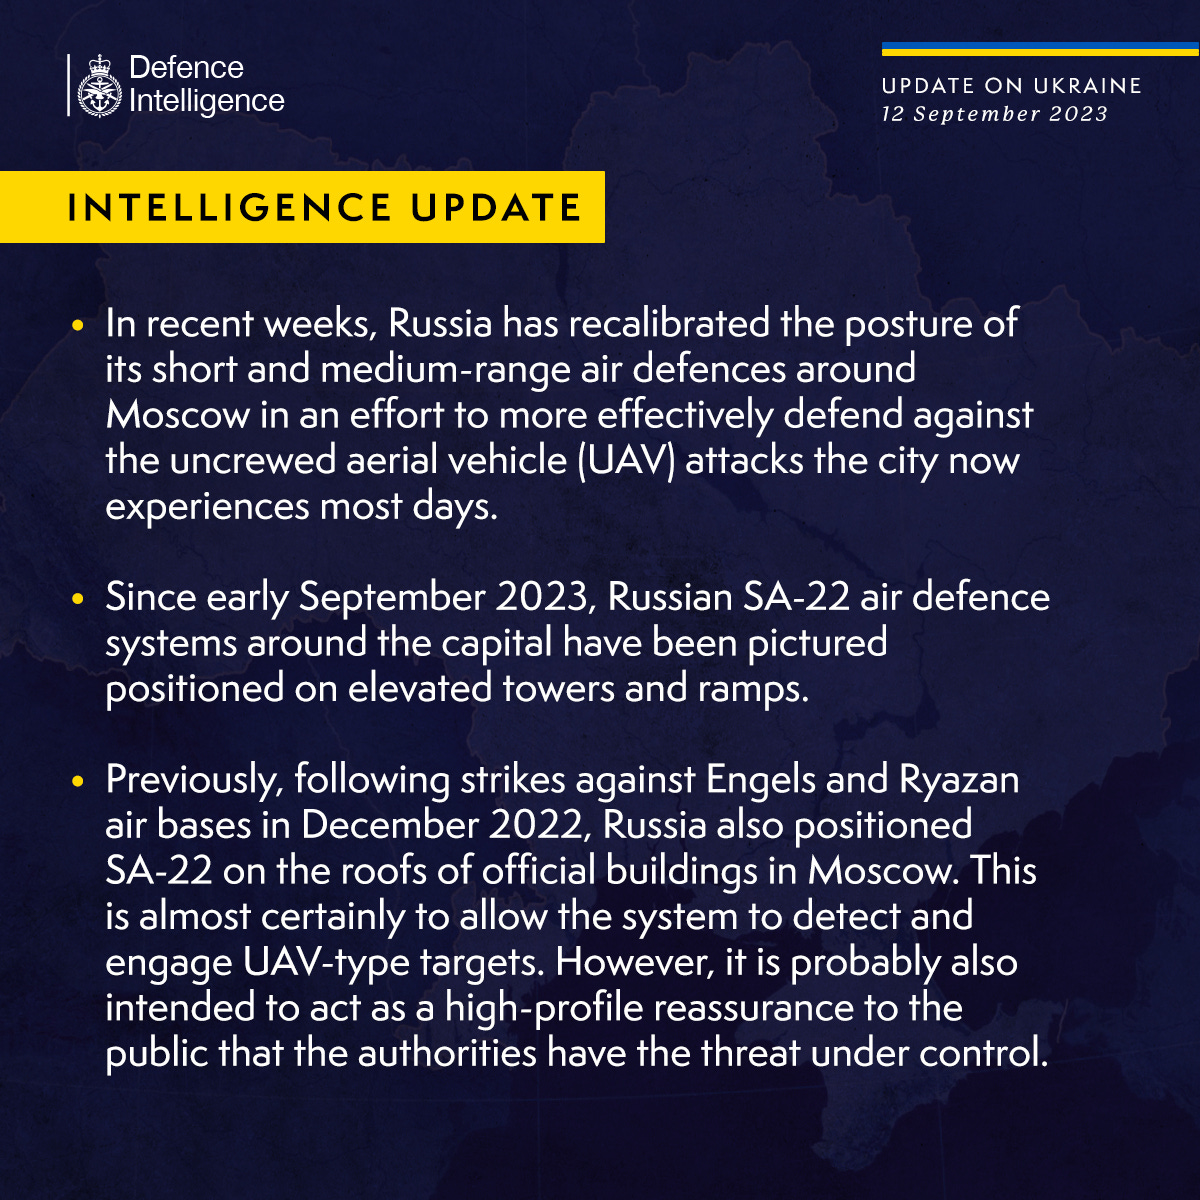 Latest Defence Intelligence update on the situation in Ukraine - 12 September 2023. Please read thread below for full image text.